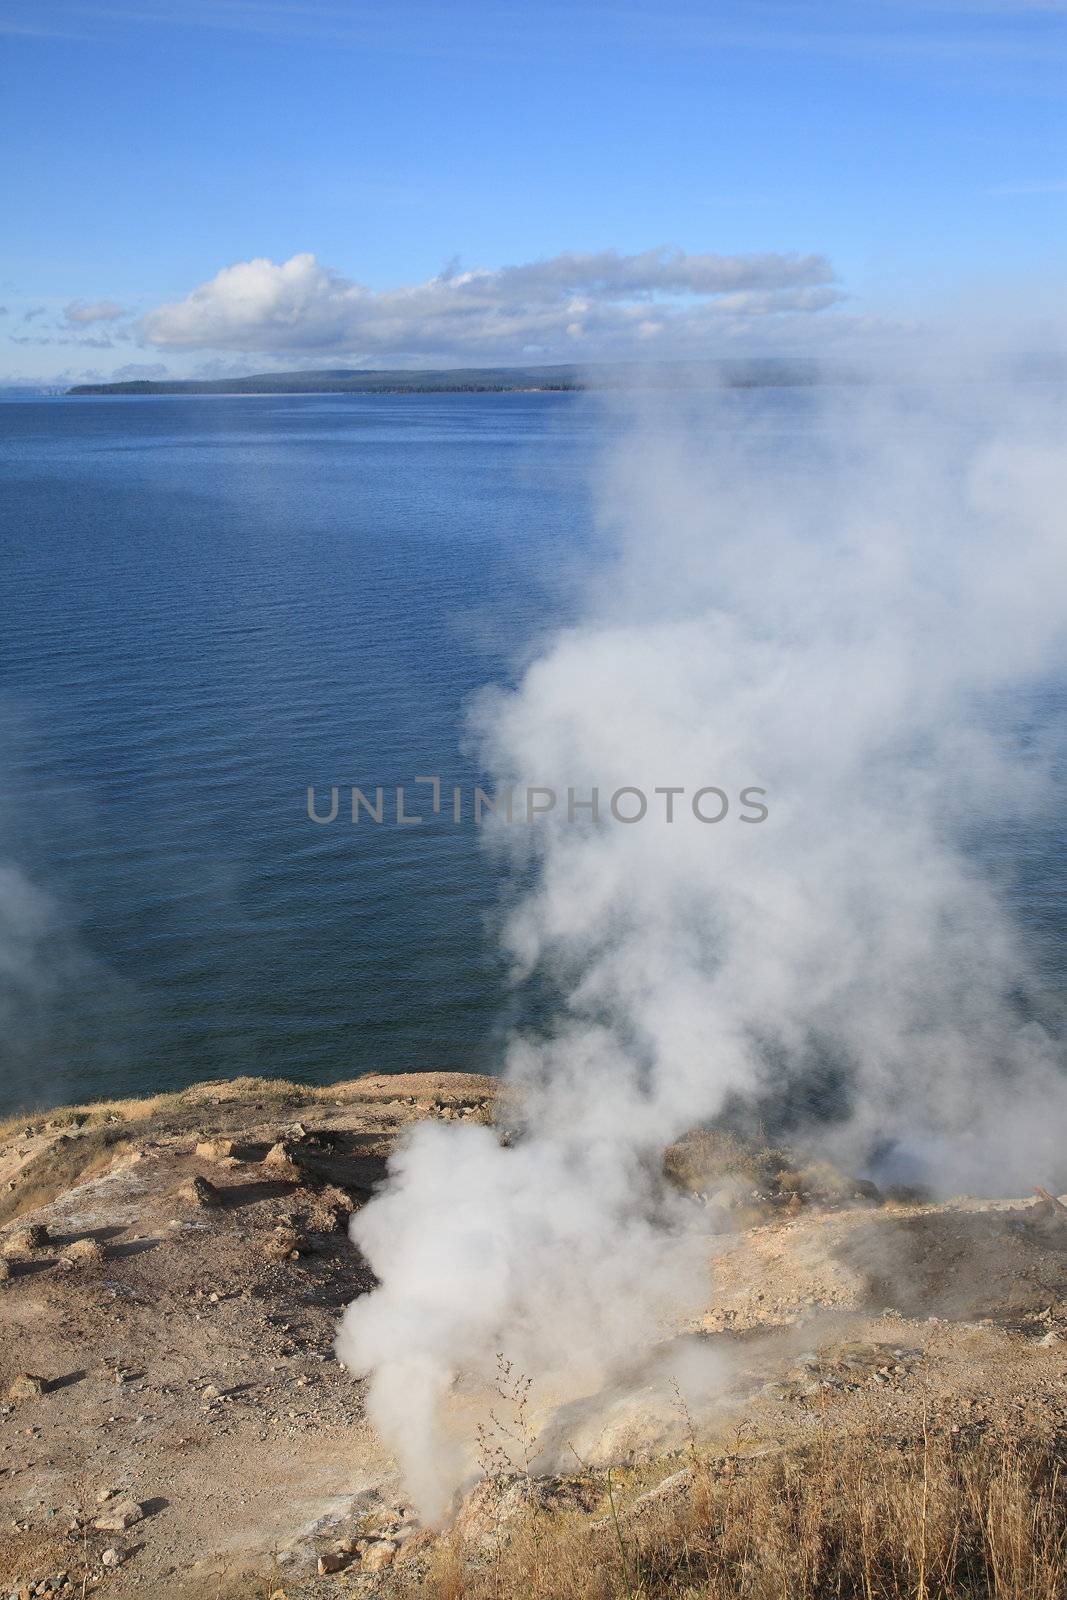 Yellowstone Lake and Hot Springs by Ffooter